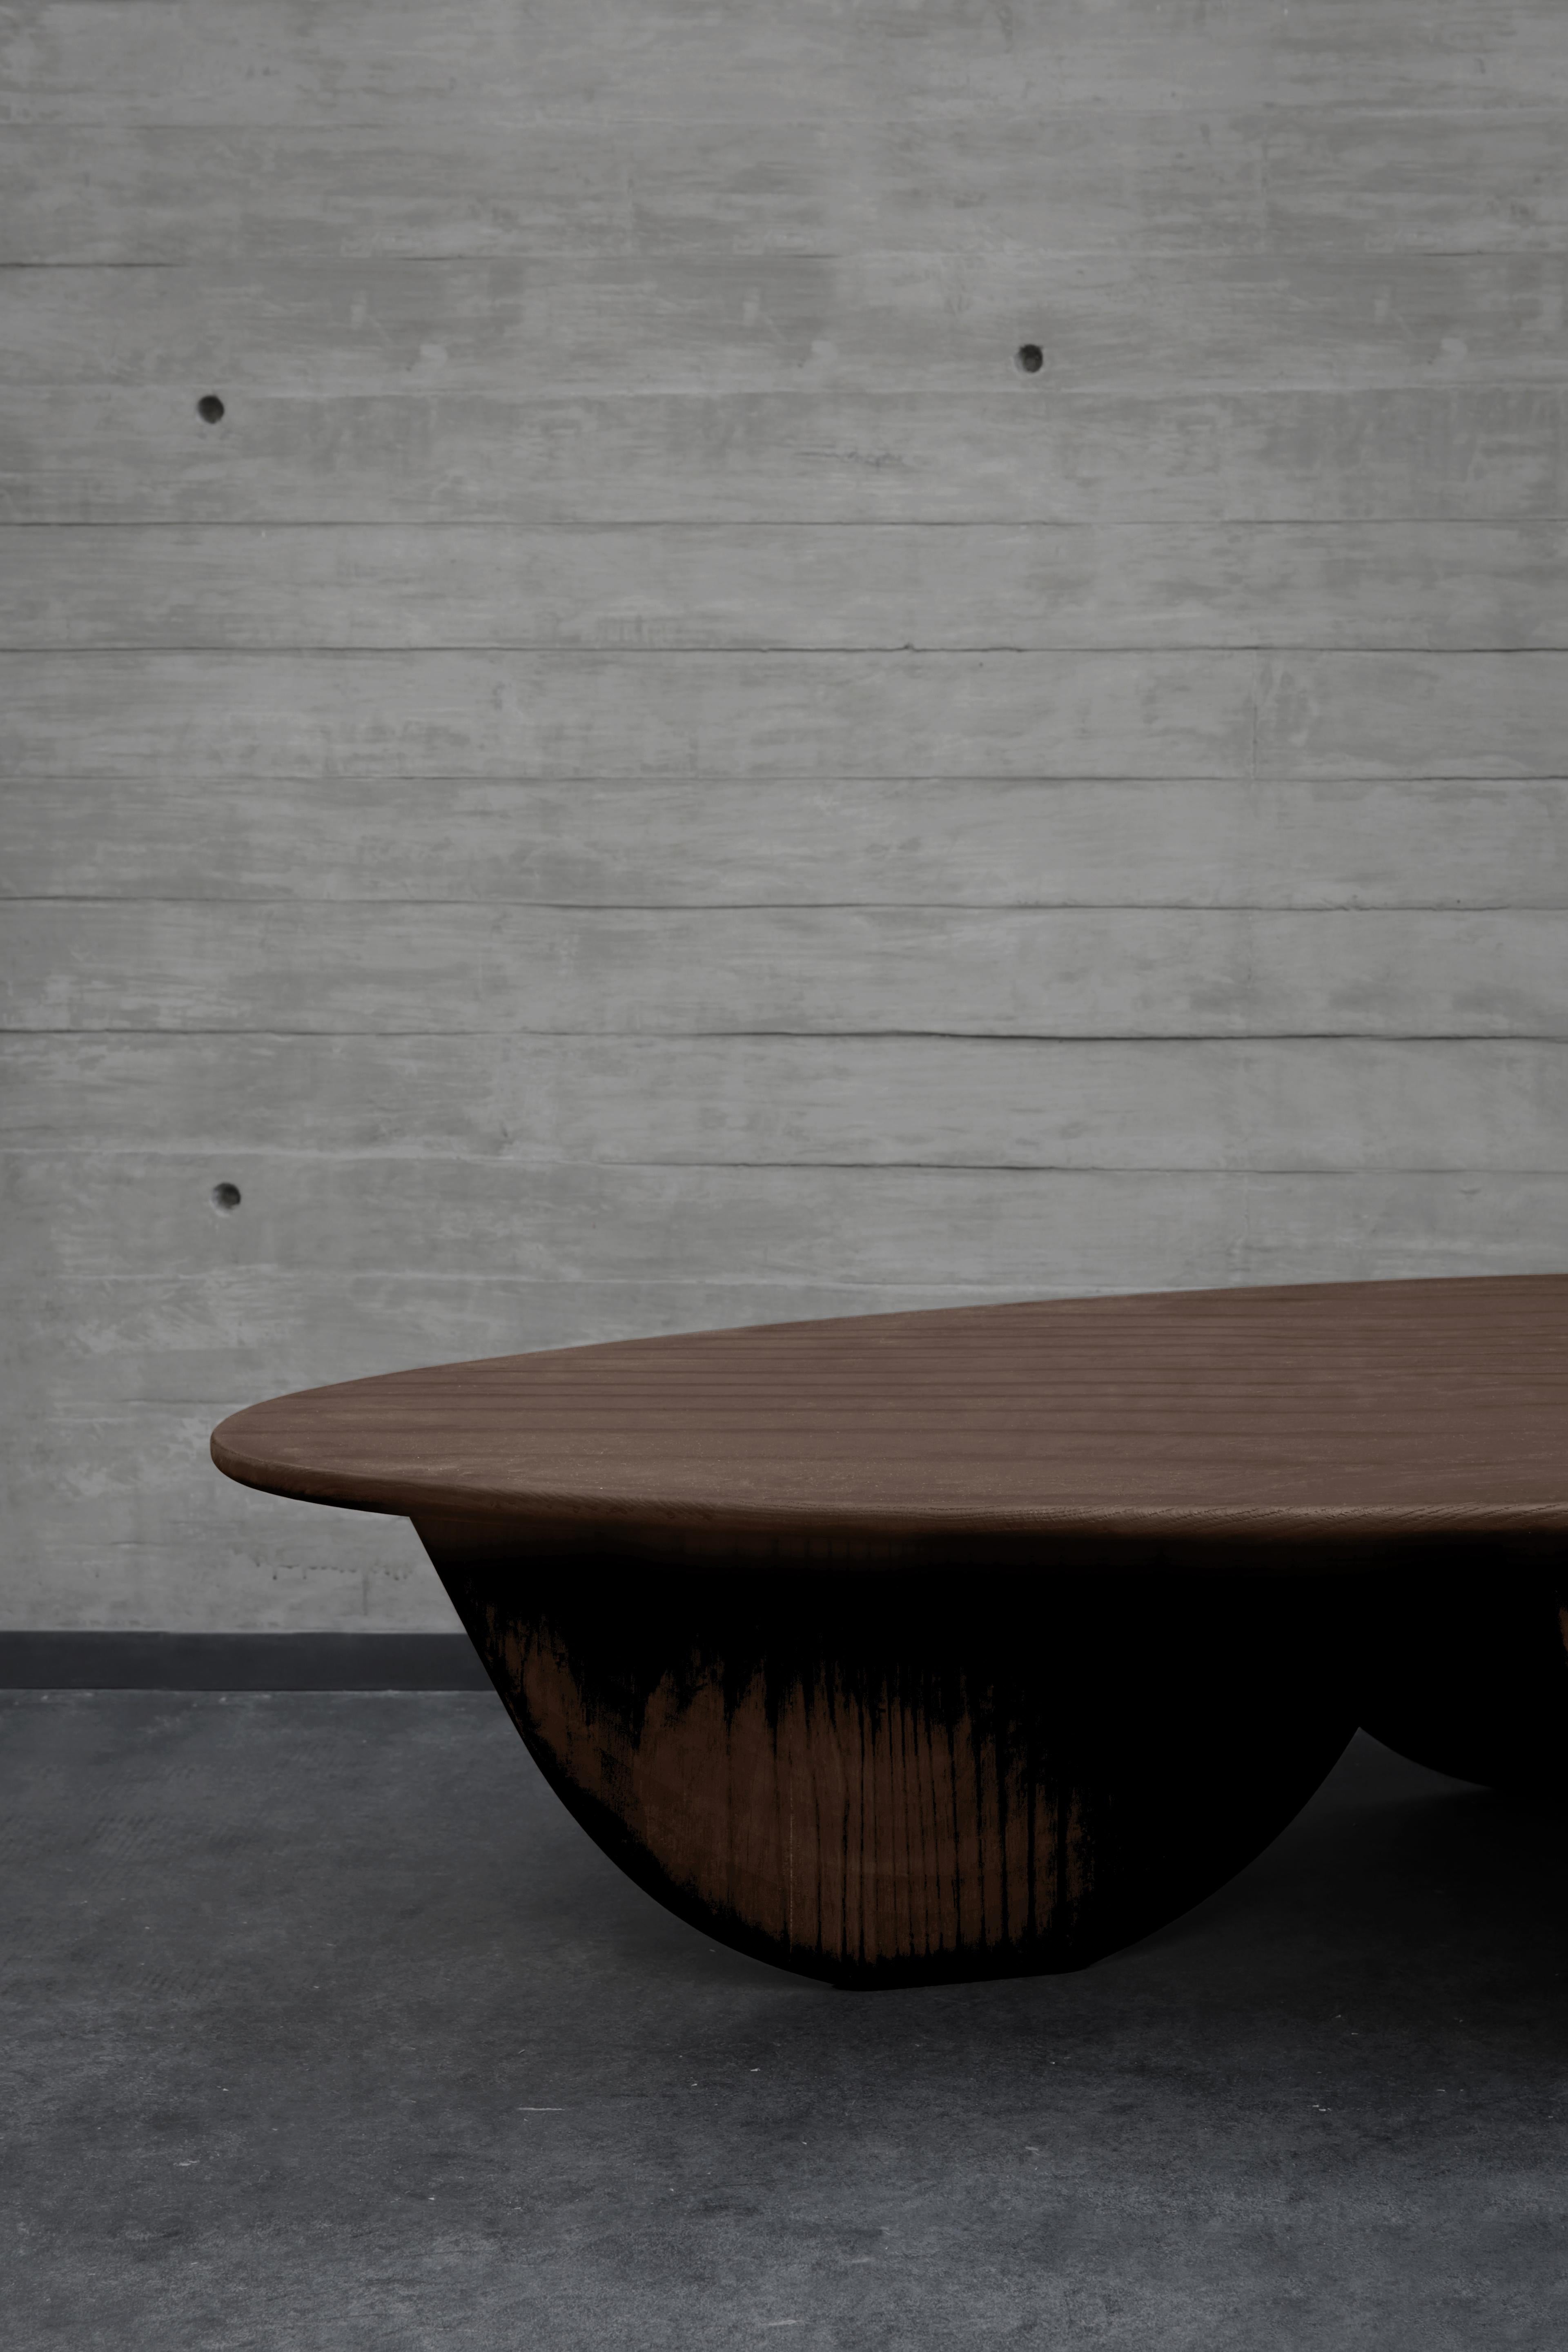 Burnished Noviembre x Coffee Table in Walnut Wood Inspired by Brancusi, Coffee Table